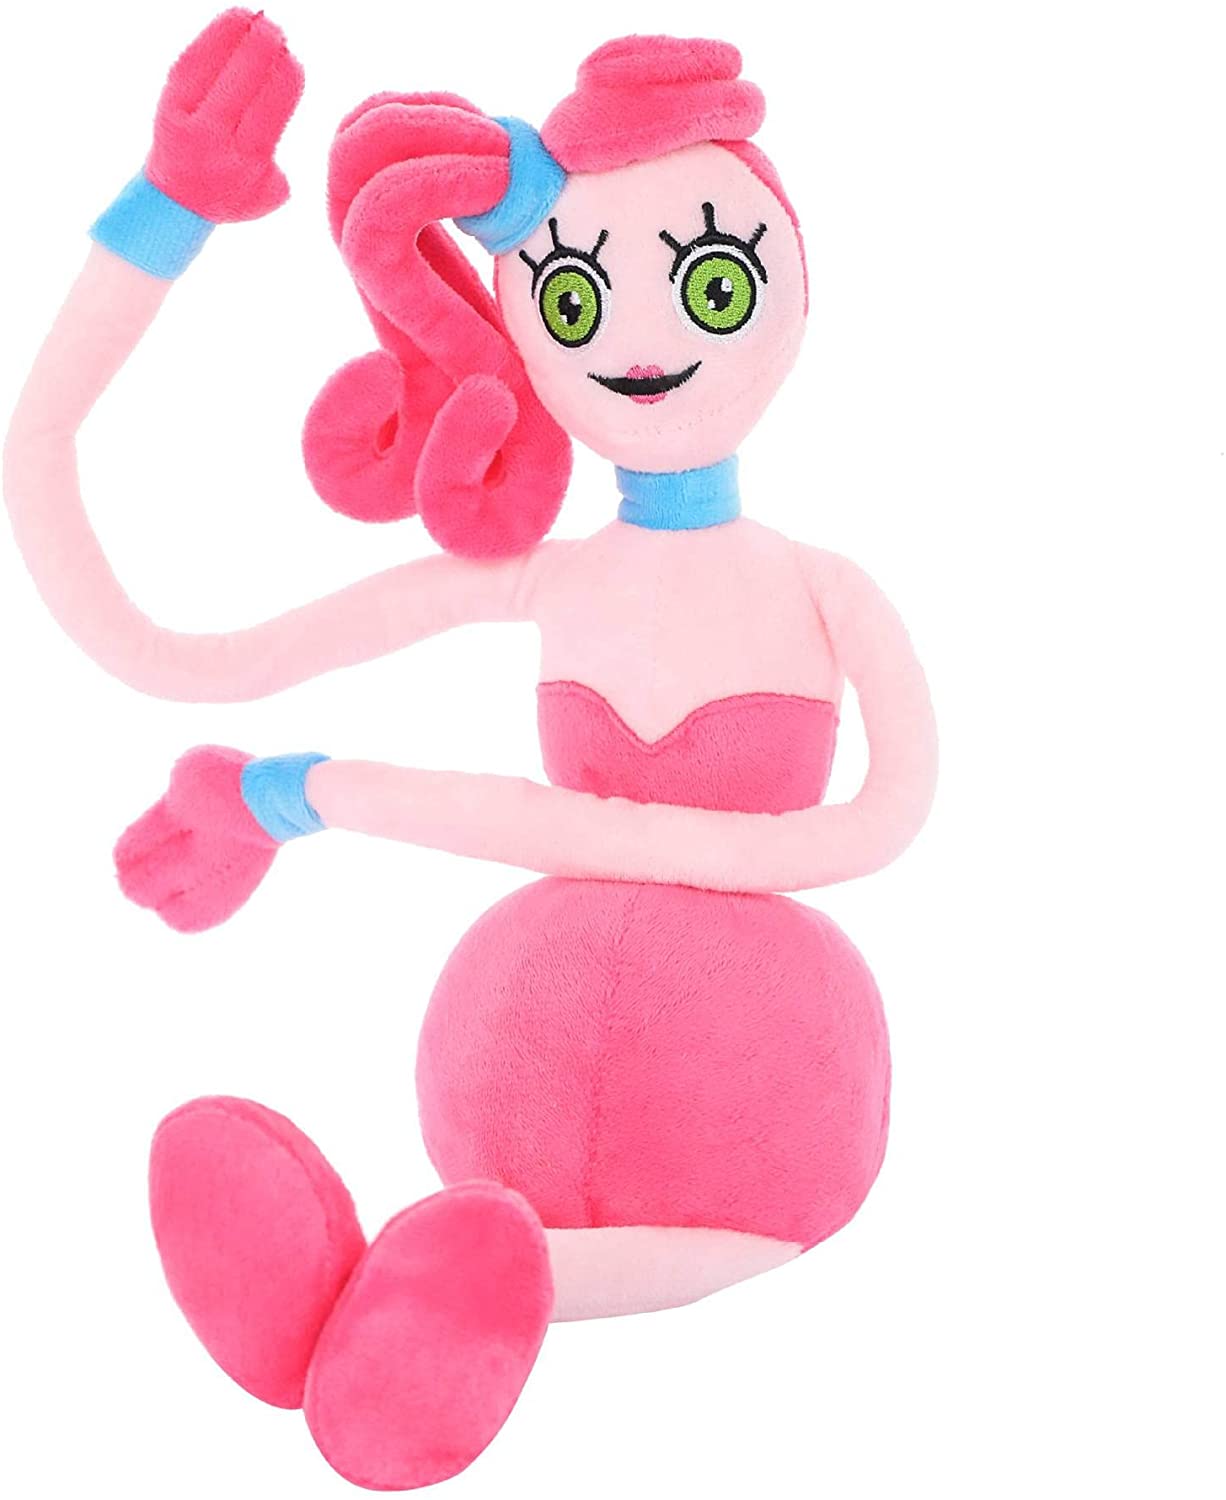 Mommy Long Legs Plushie by Gnisca2152 on DeviantArt